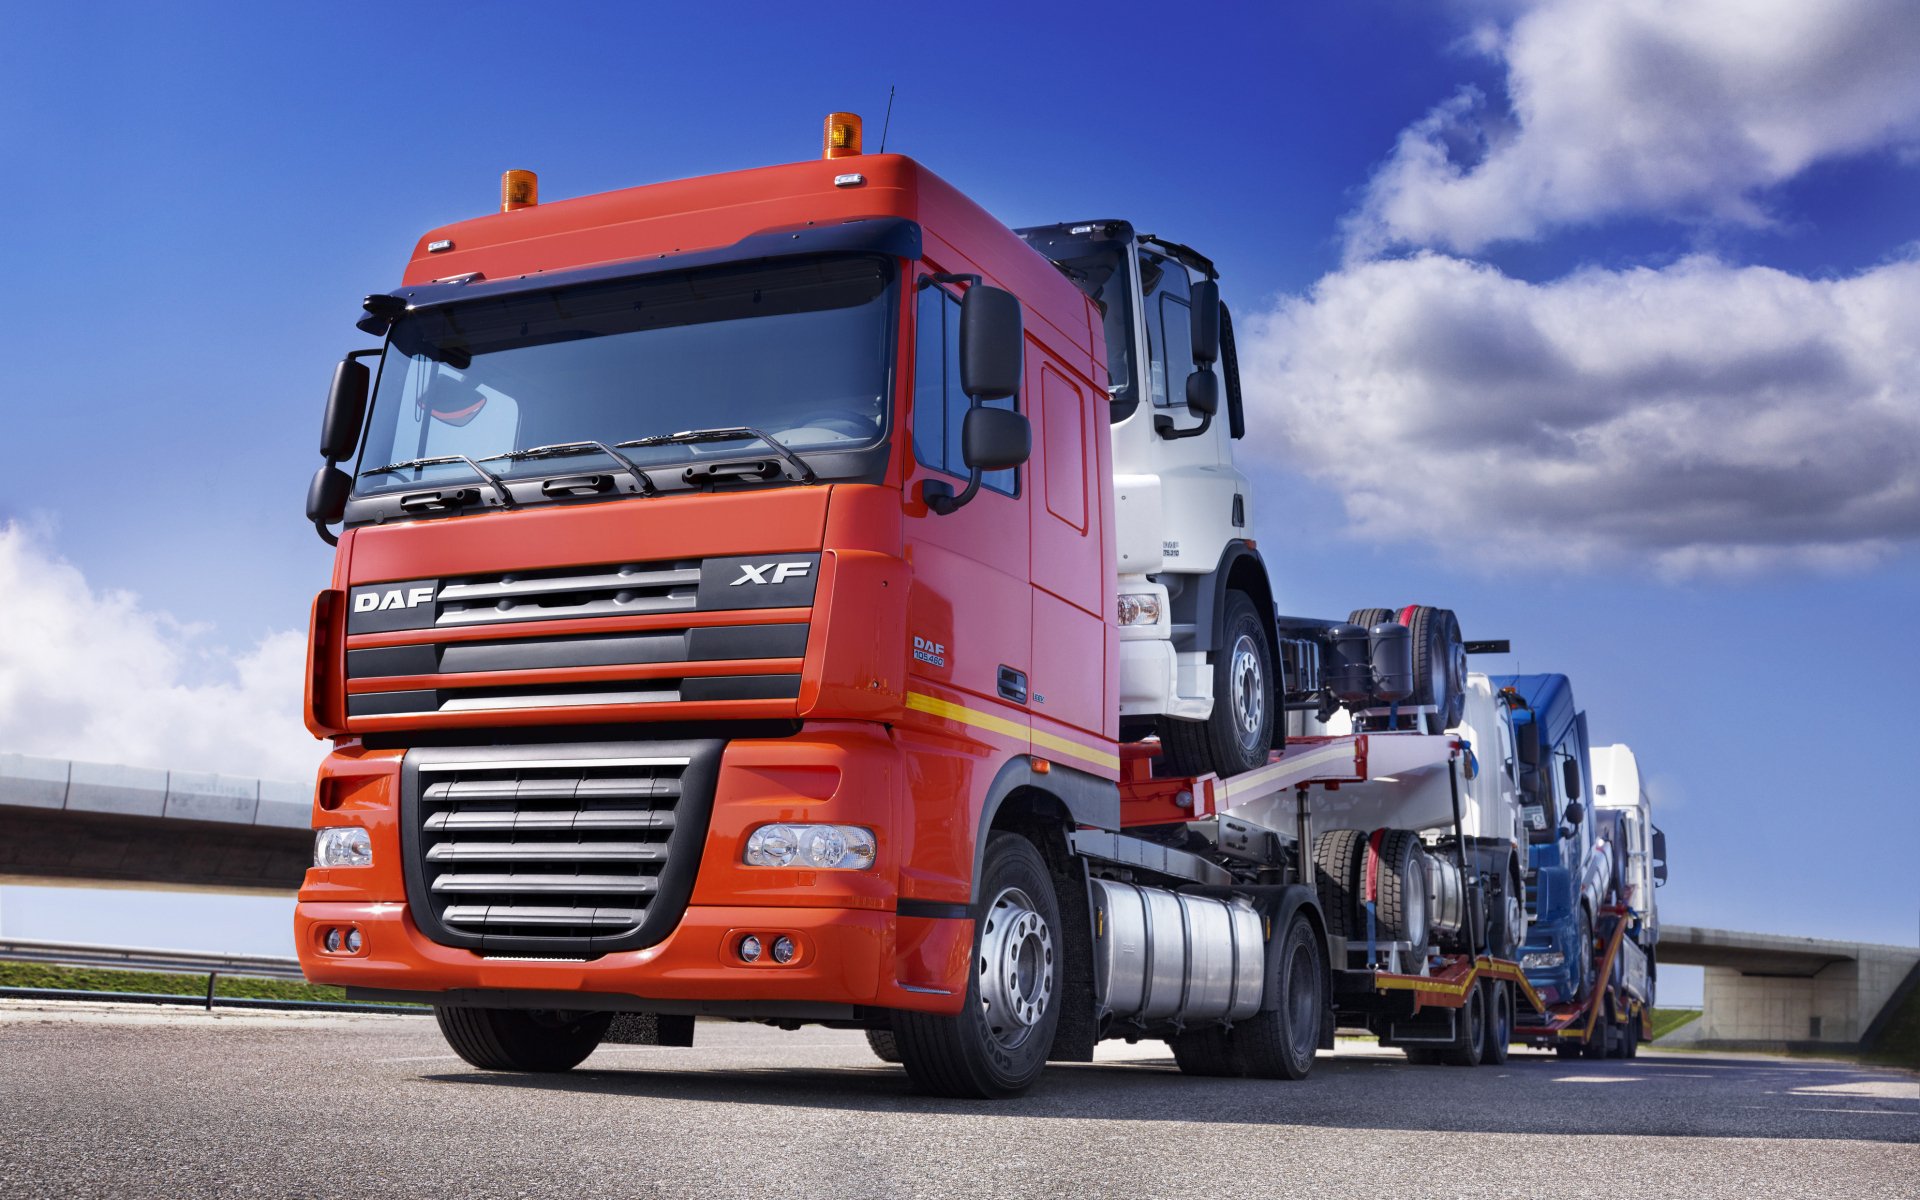 DAF Truck 4k Ultra HD Wallpaper and Background Image | 3969x2480 | ID